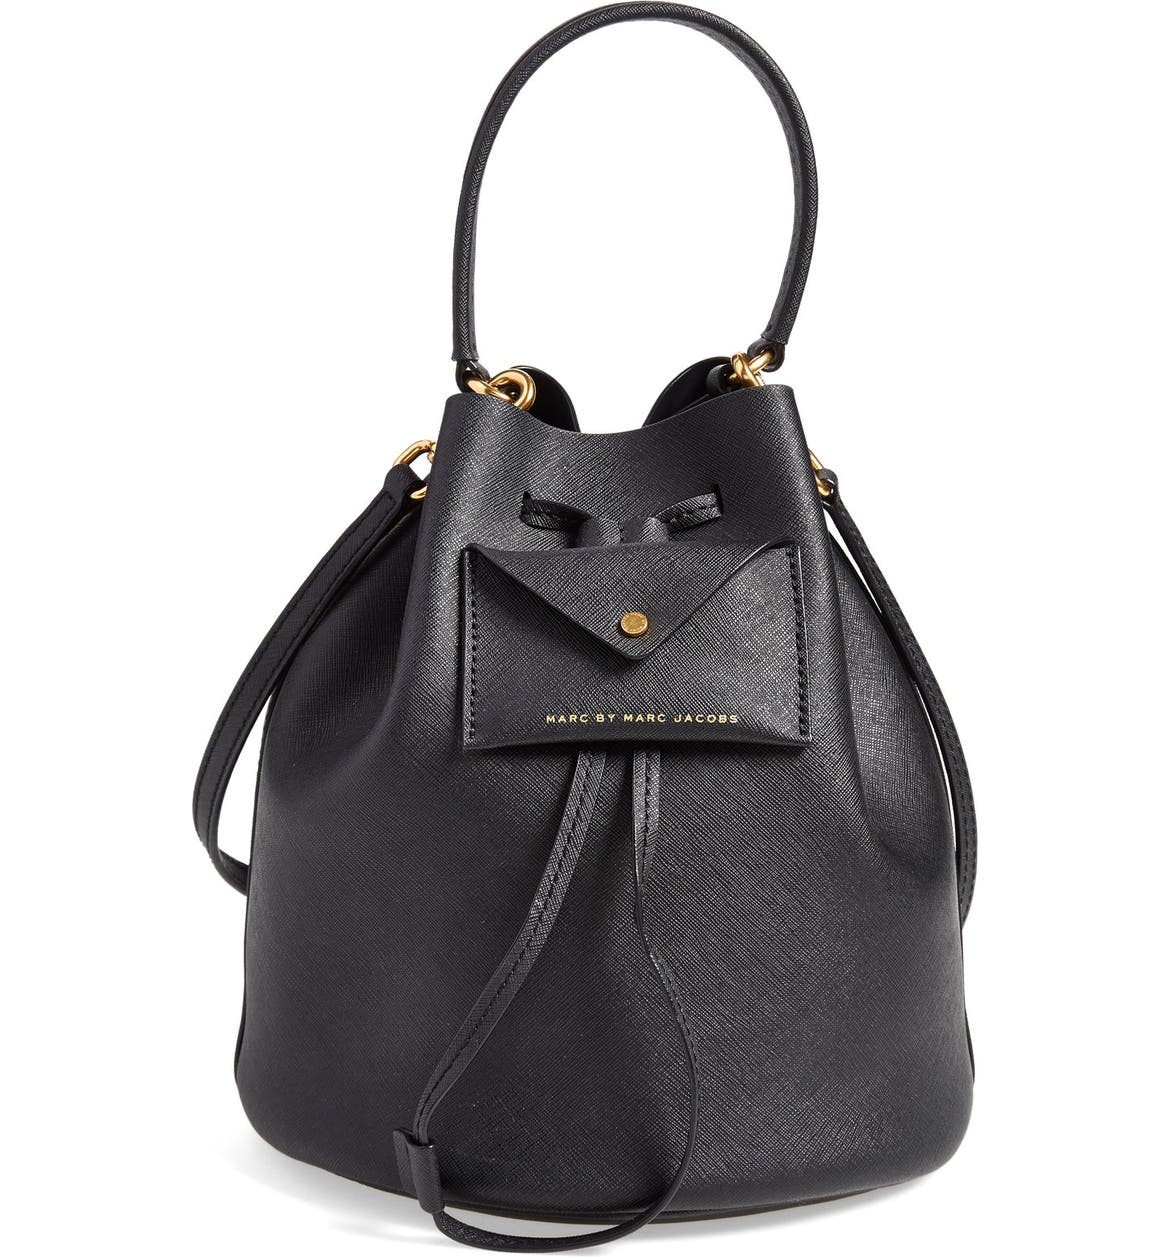 MARC BY MARC JACOBS 'Metropoli' Leather Bucket Bag | Nordstrom